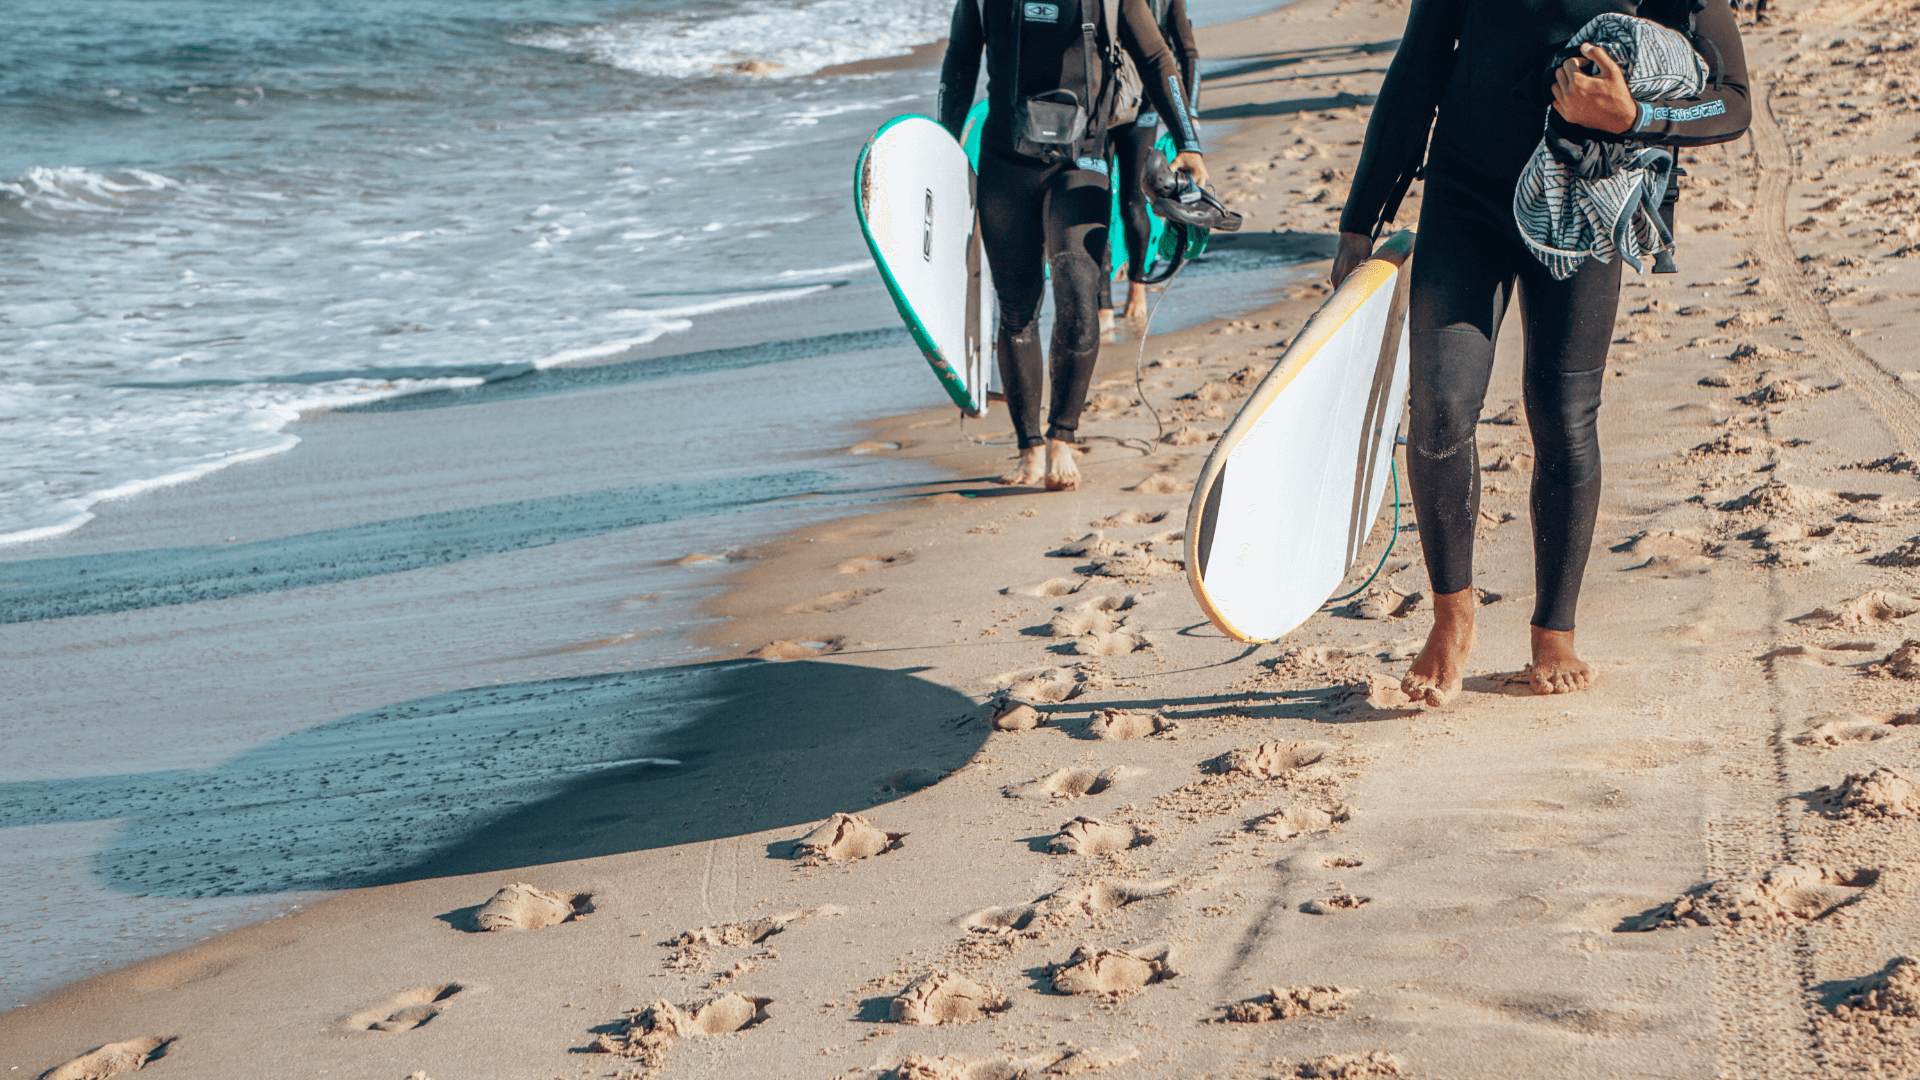 two-surfers-carrying-surfboards-on-gold-coast-beach